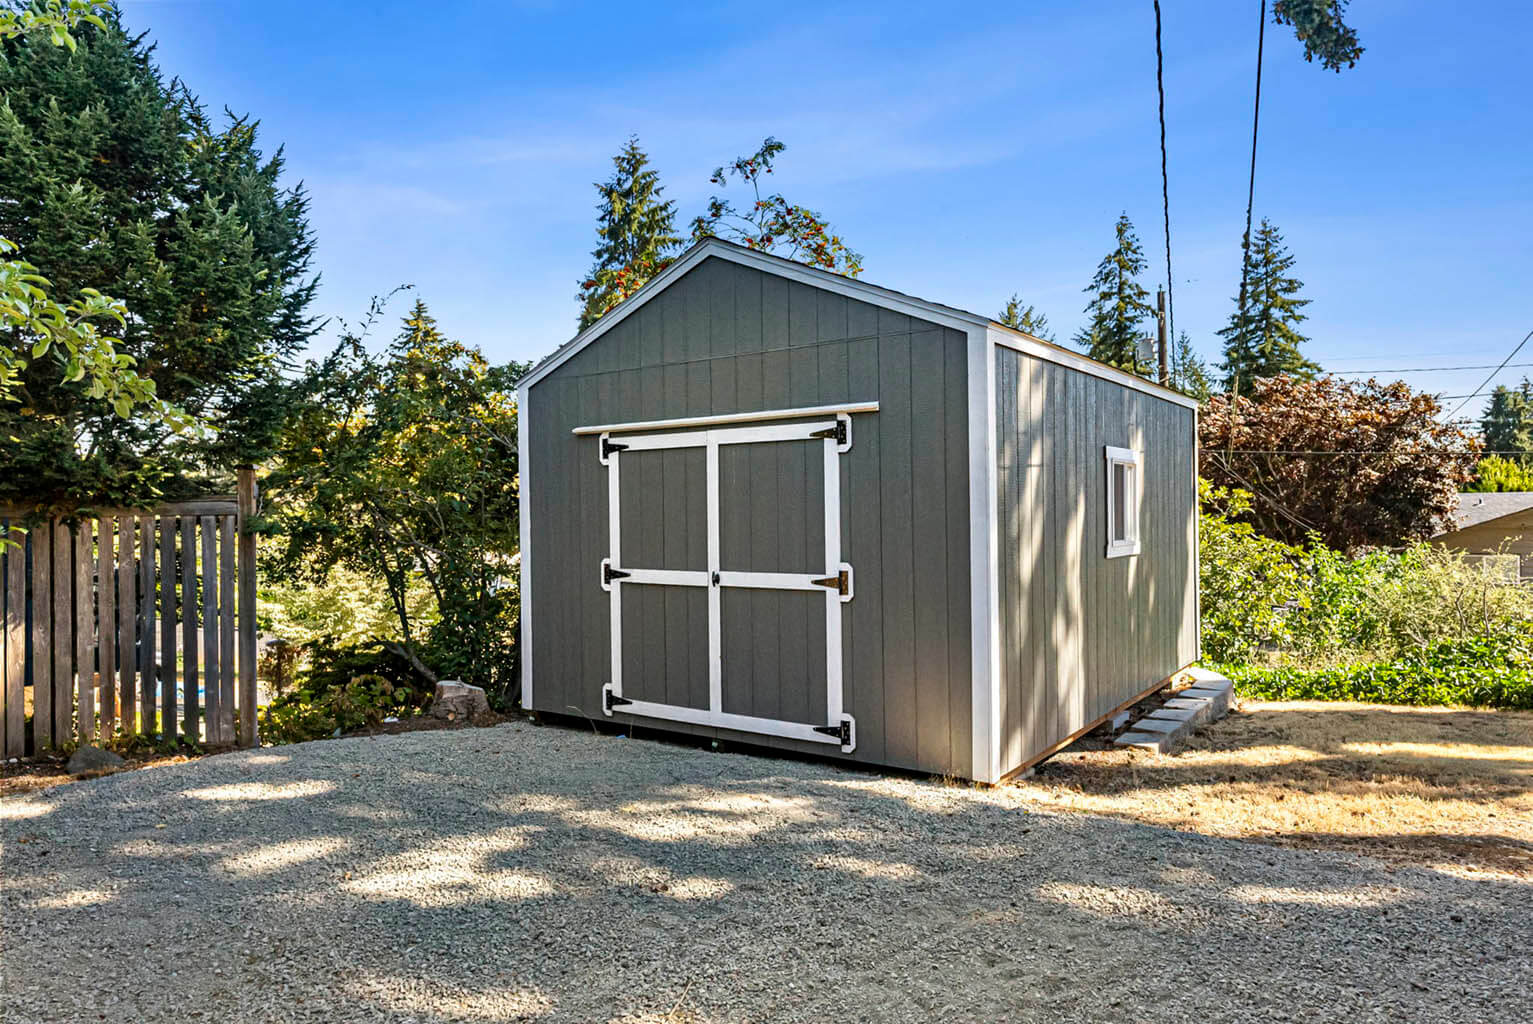 200sf utility shed with lofted storage